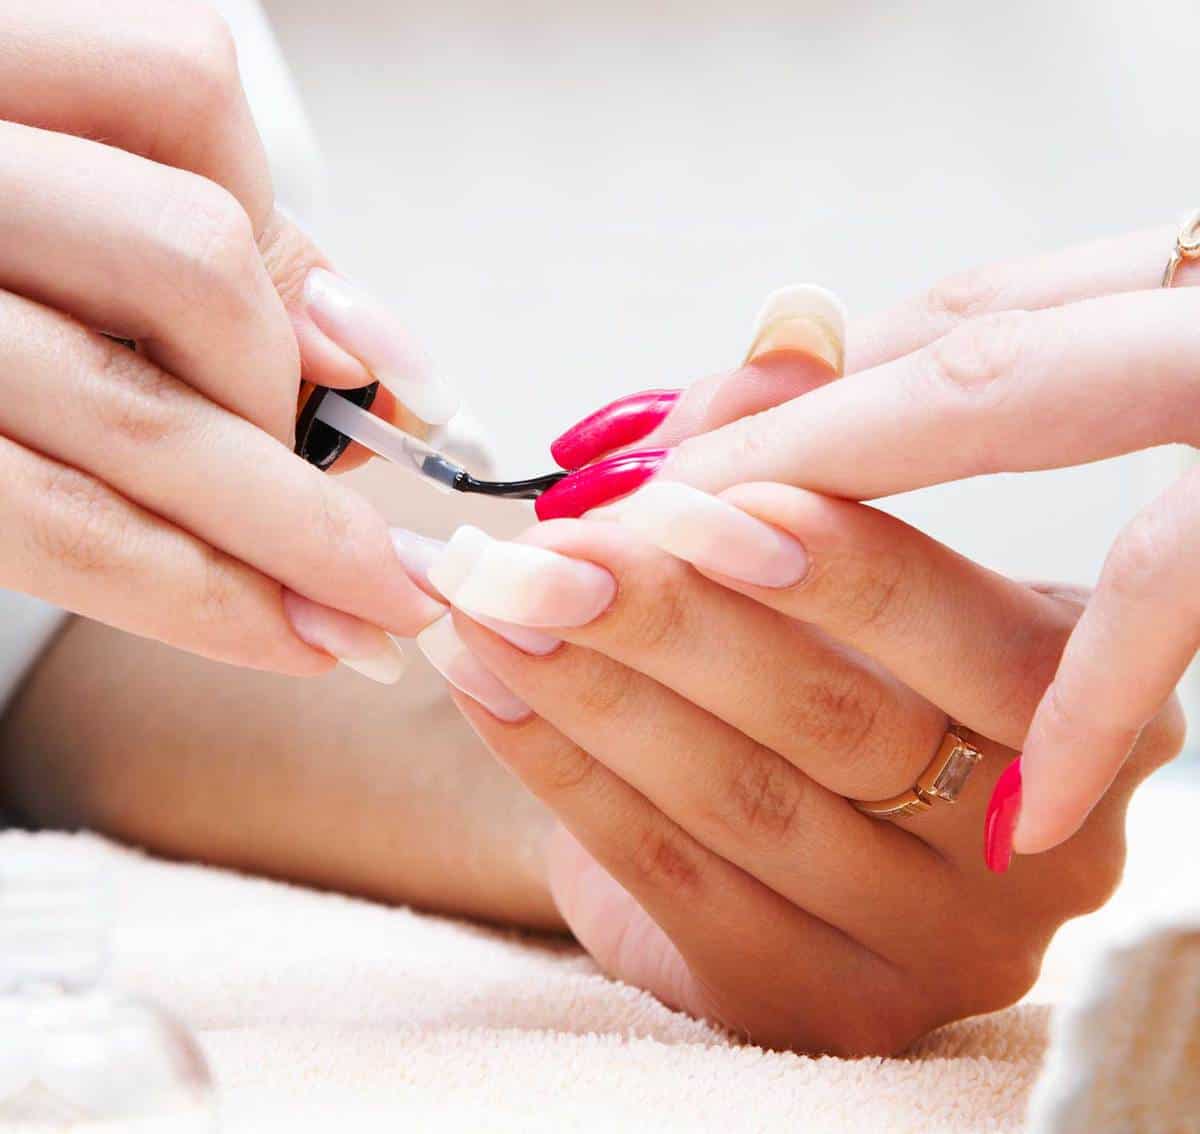 Hand getting red manicure on nails